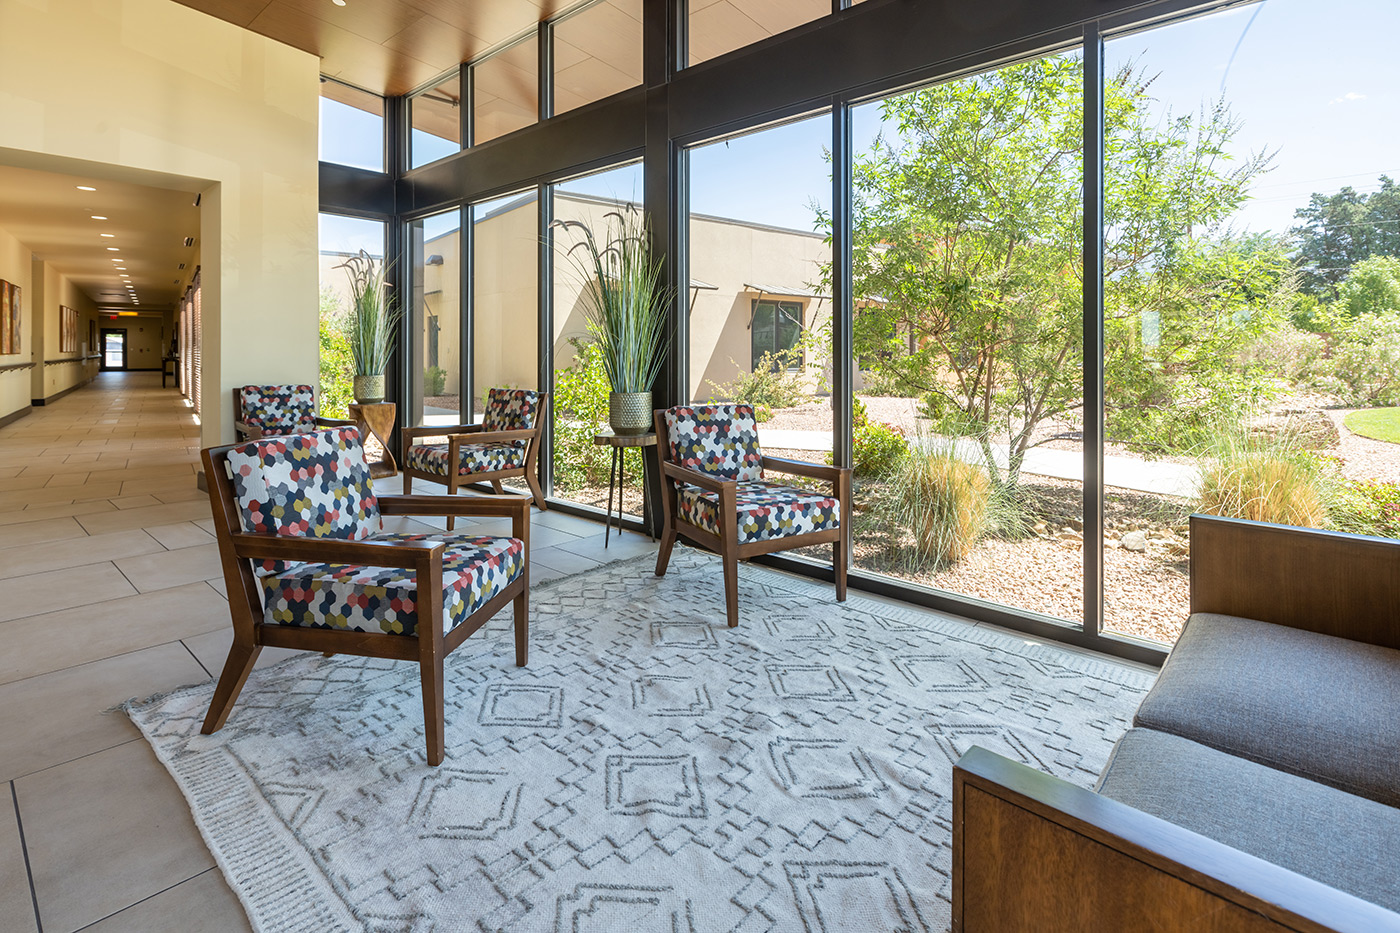 The Watermark at Cherry Hills interior seating area with view.